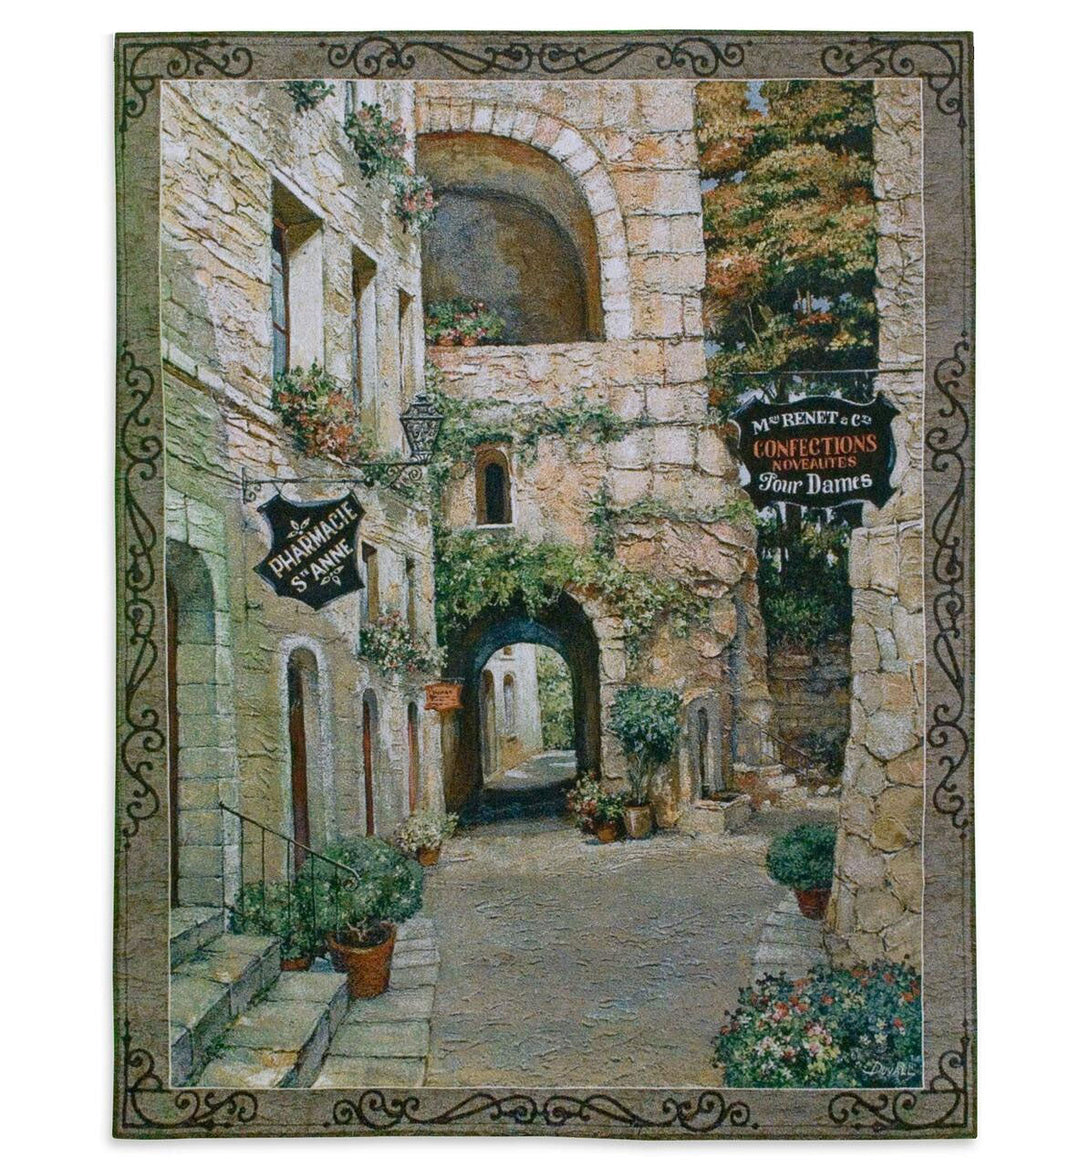 Italian Country Village II tapestry